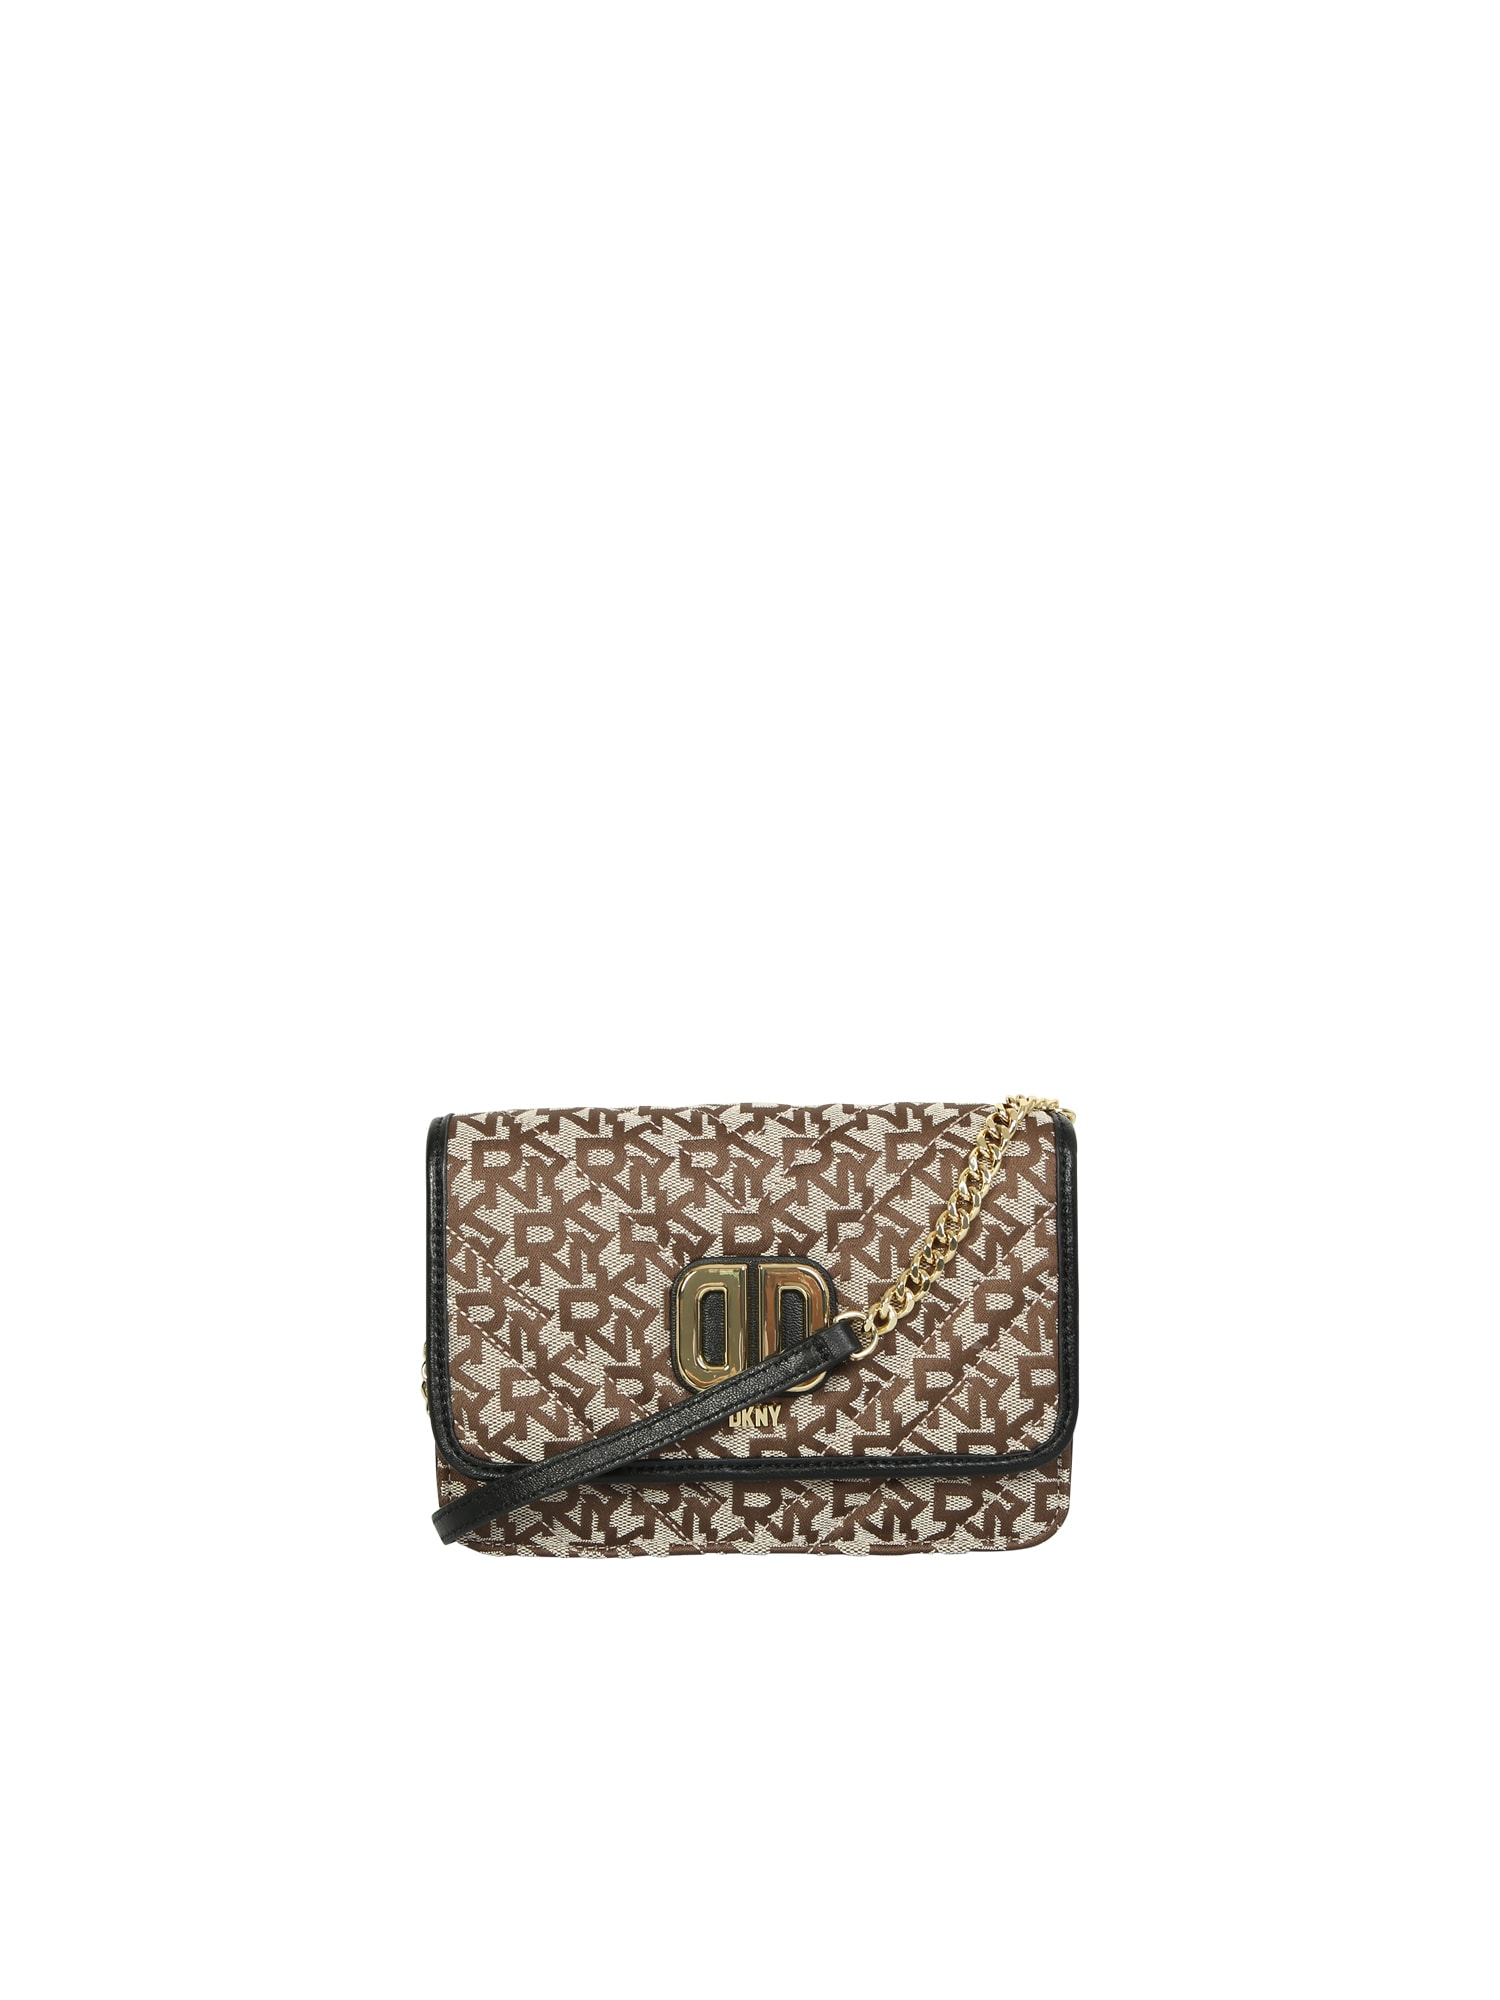 Delphine Bag By Dkny